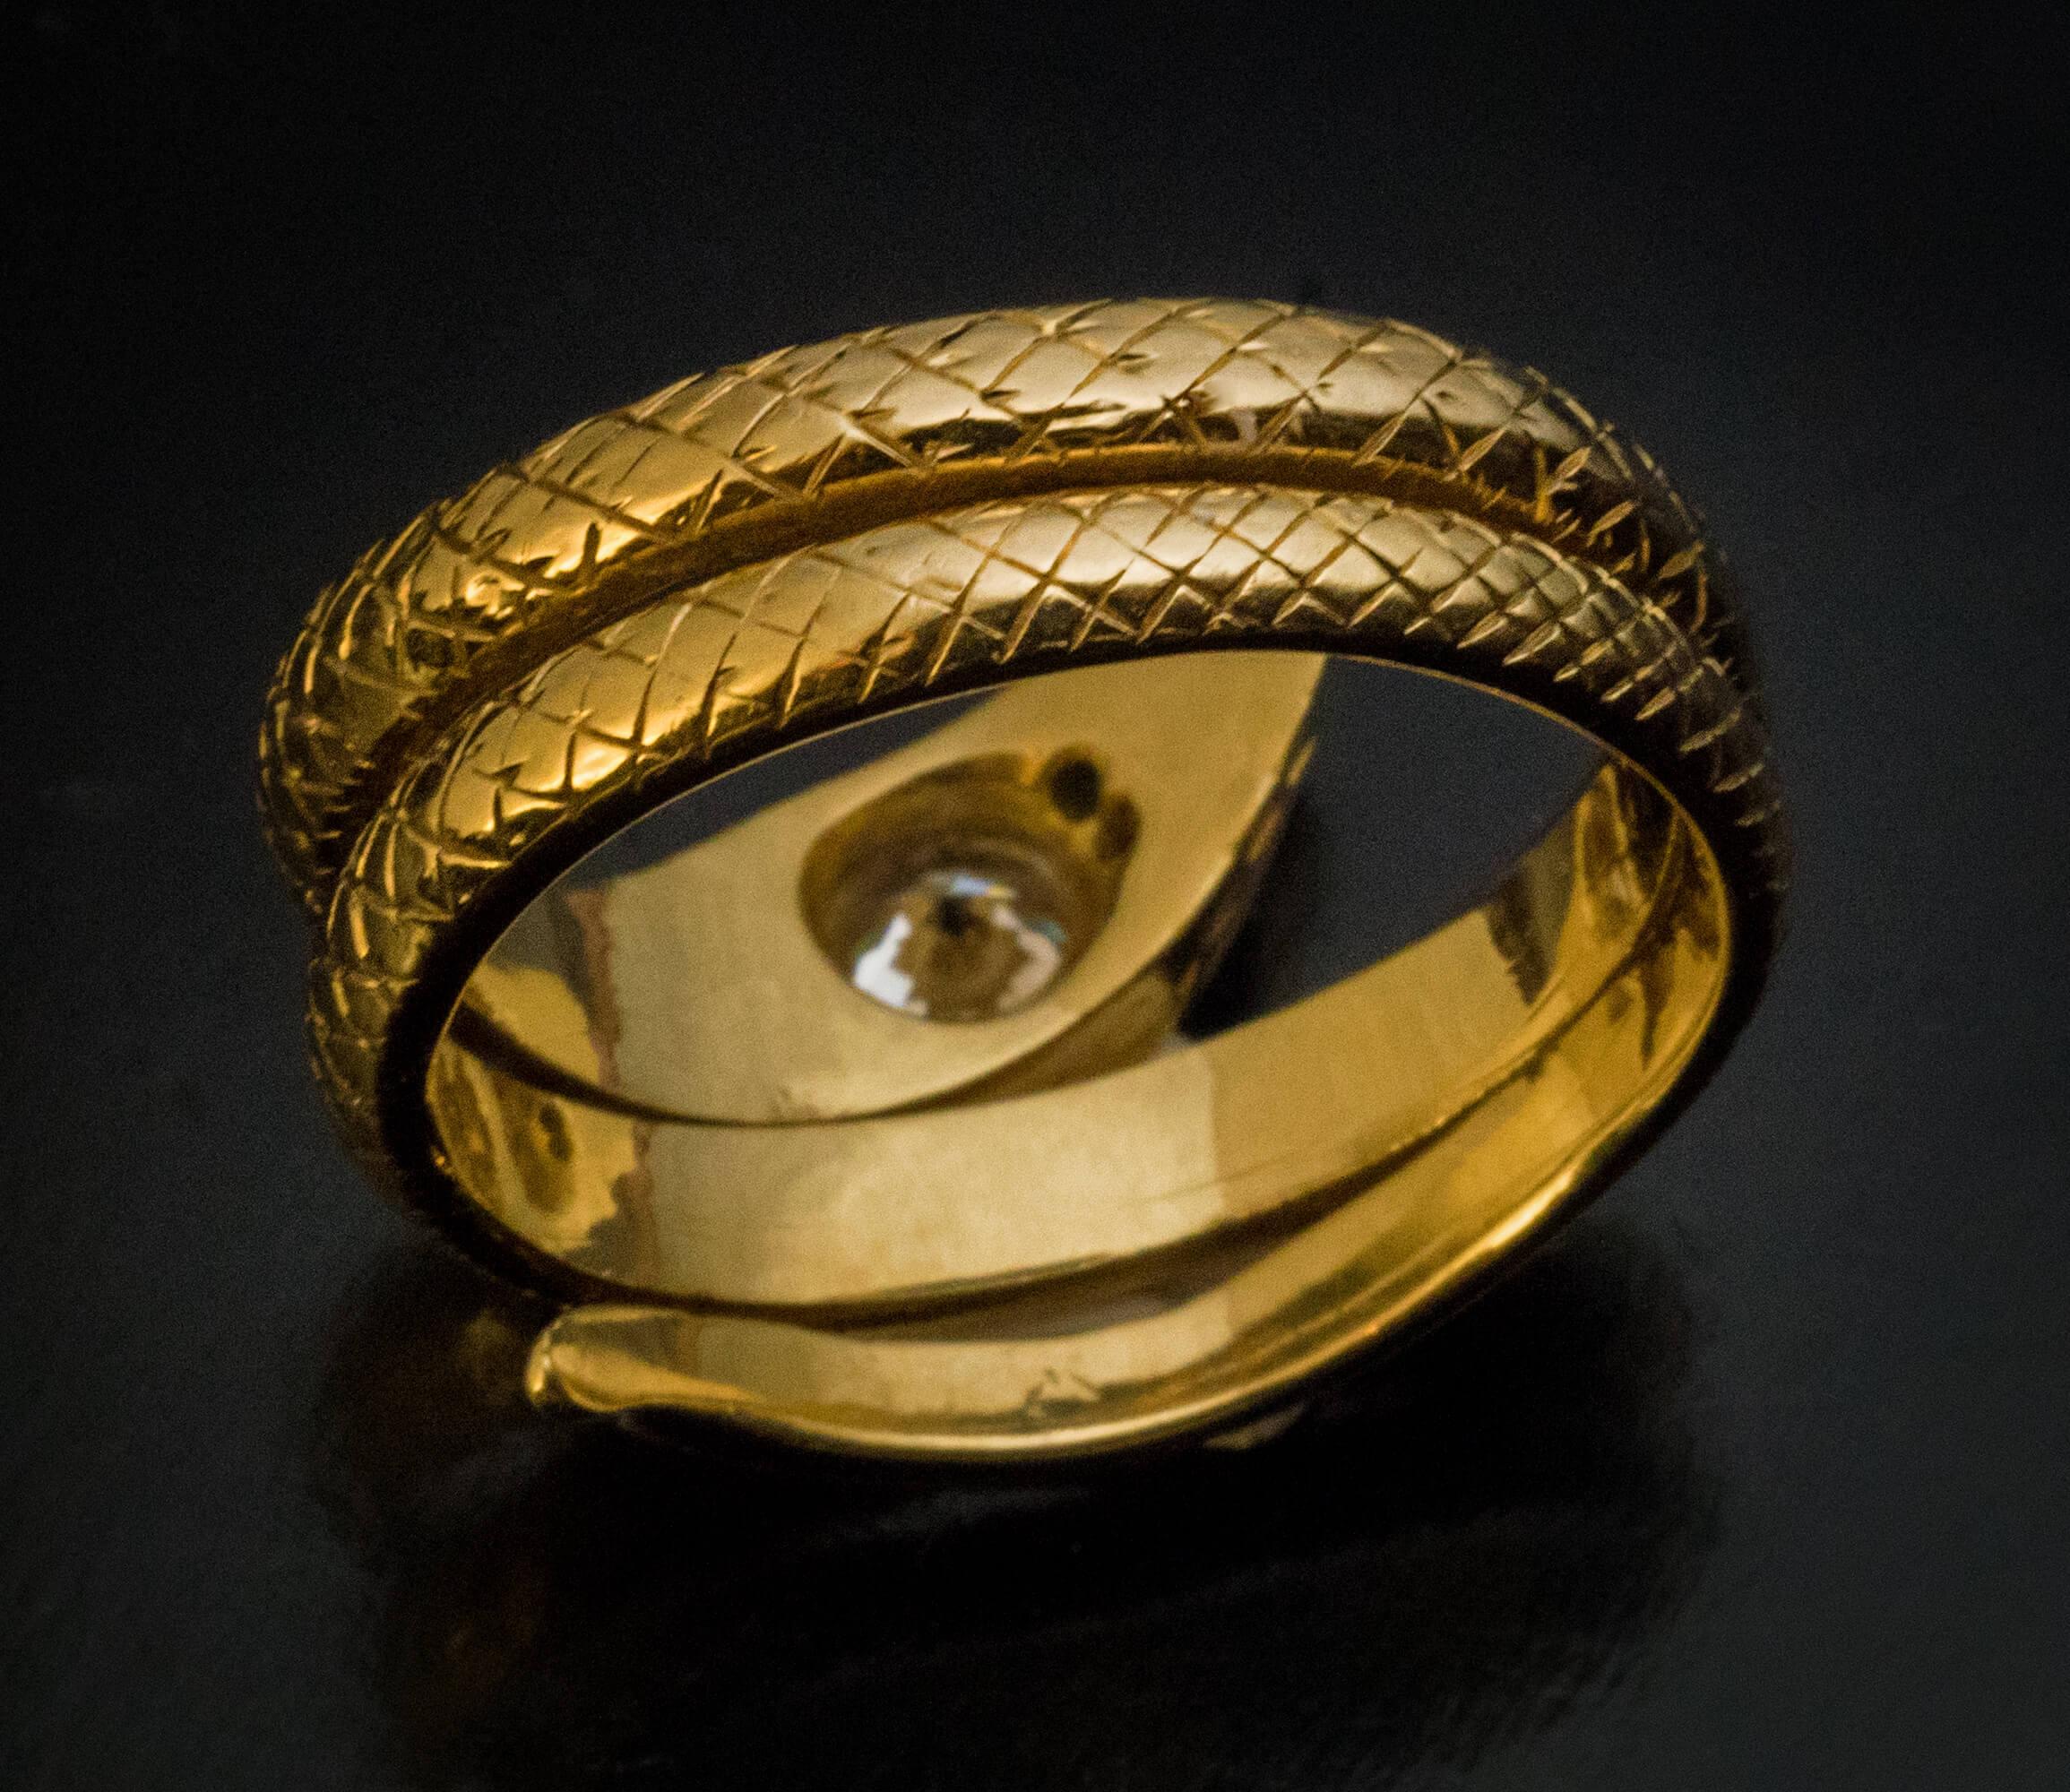 This solid 18K gold ring is designed as a stylized coiled snake with finely hand-engraved skin.  The head of the snake is embellished with a sparkling bright white diamond (approximately 0.51 ct, H color, VS1 clarity). The eyes are set with small